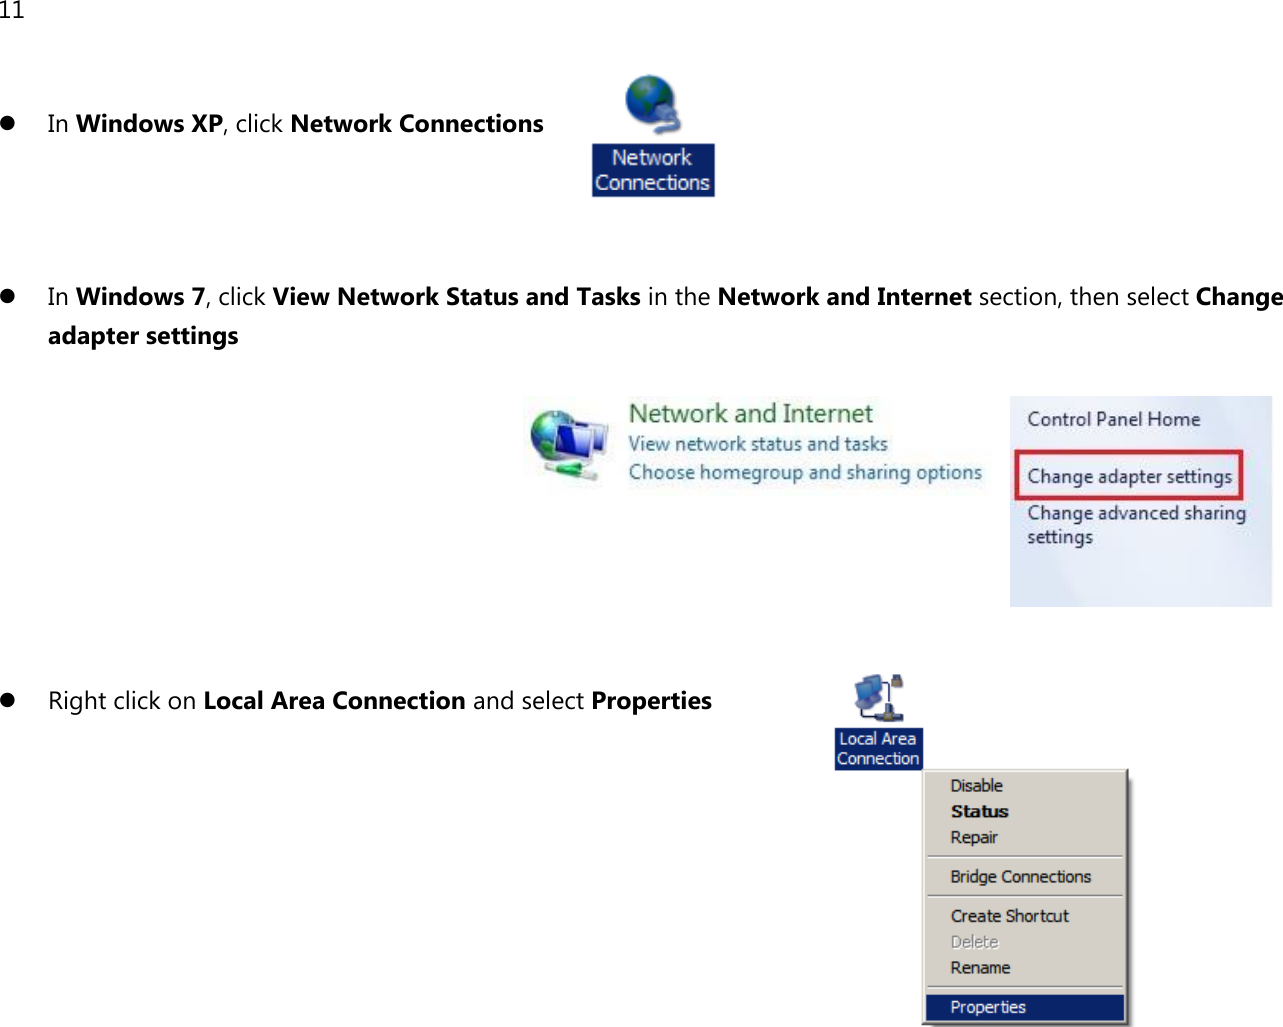 11    In Windows XP, click Network Connections     In Windows 7, click View Network Status and Tasks in the Network and Internet section, then select Change adapter settings           Right click on Local Area Connection and select Properties        